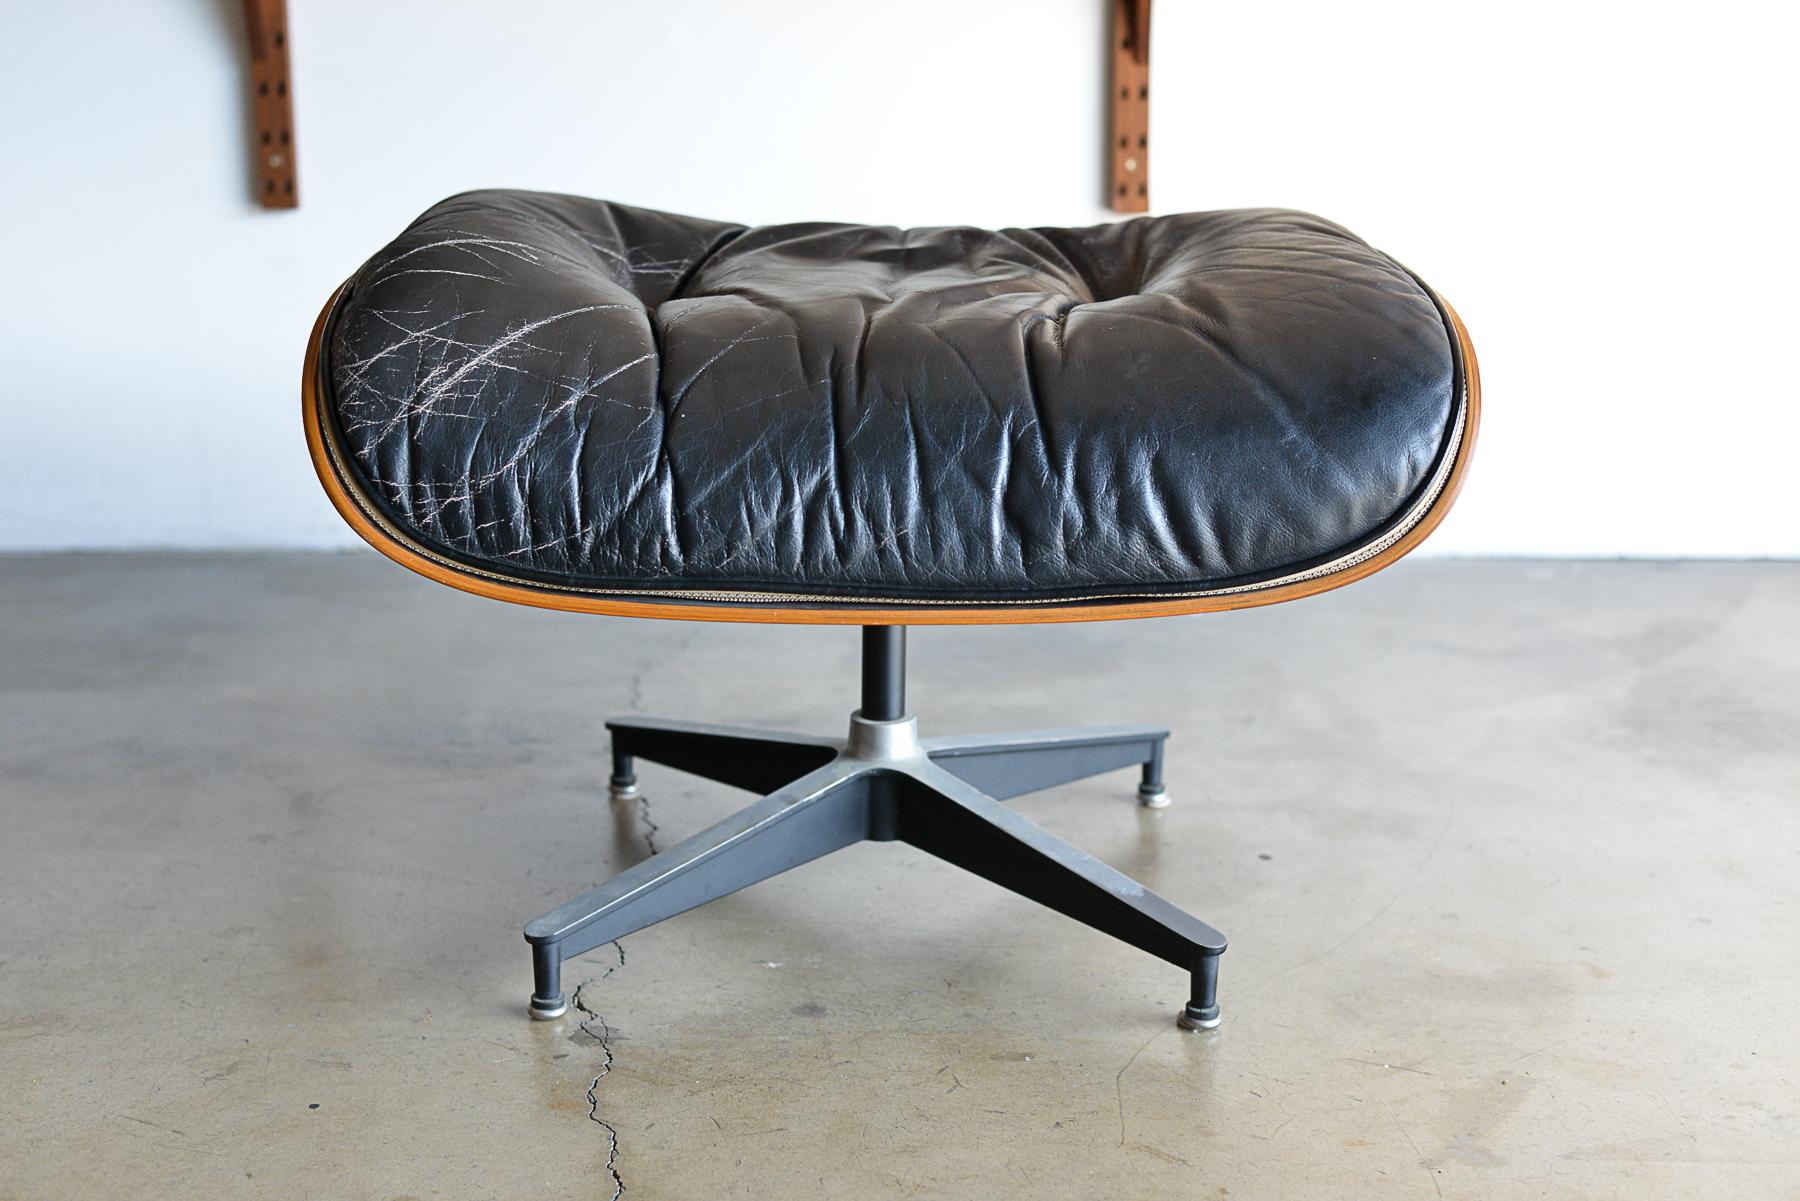 Rosewood and black leather Eames 671 ottoman, ca. 1970. 3rd generation rosewood and black leather Eames 671 ottoman. Good original condition with original leather and tags on underside. Great rosewood grain, can match an existing chair or replace